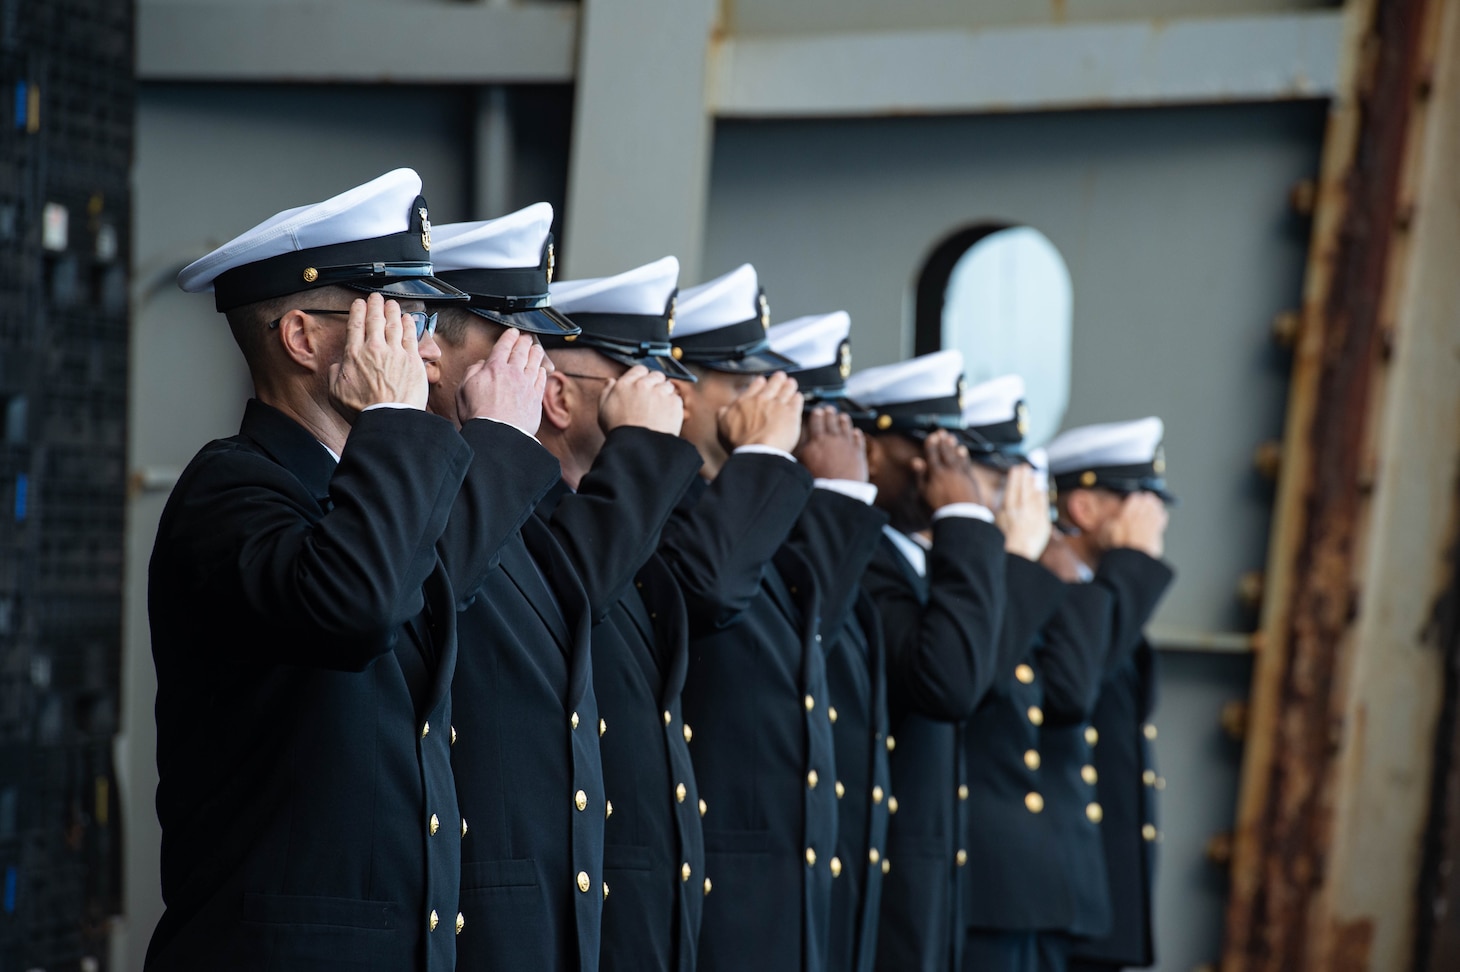 And all Command Master Chief honor guard renders honors during a burial-at-sea aboard the Nimitz-class aircraft carrier USS Harry S. Truman (CVN 75), Dec. 11, 2021.